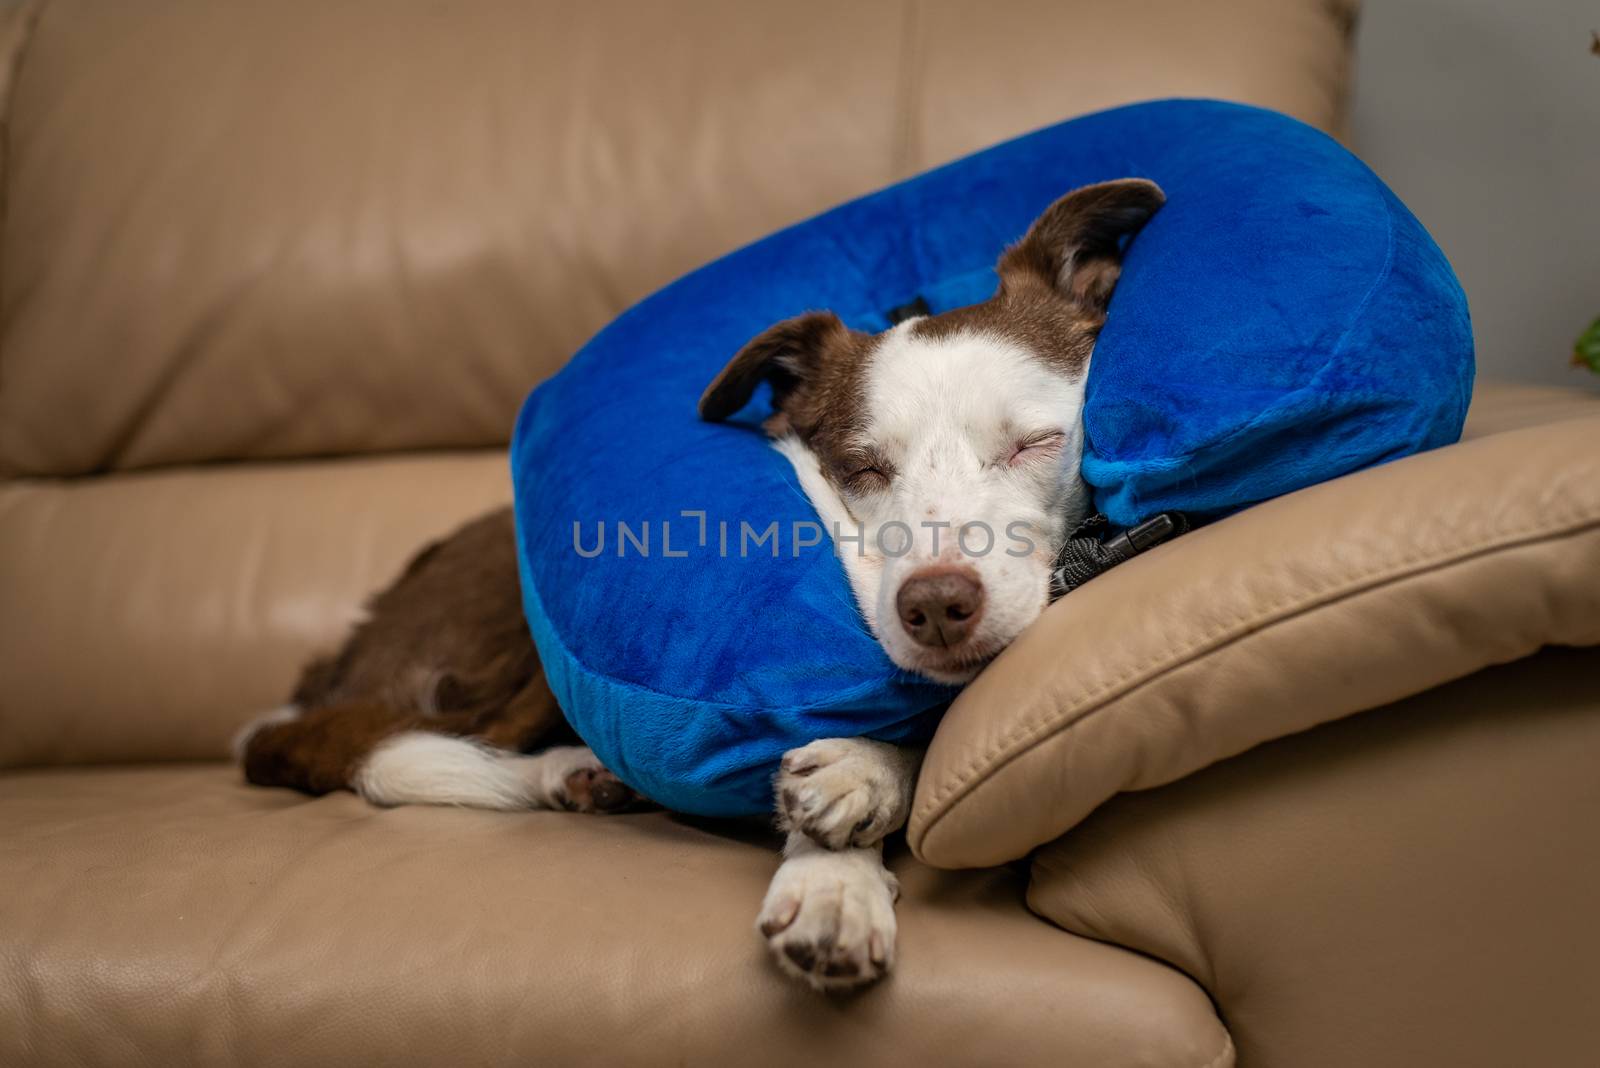 Cute Border Collie dog sleeping on a couch, wearing blue inflatable collar